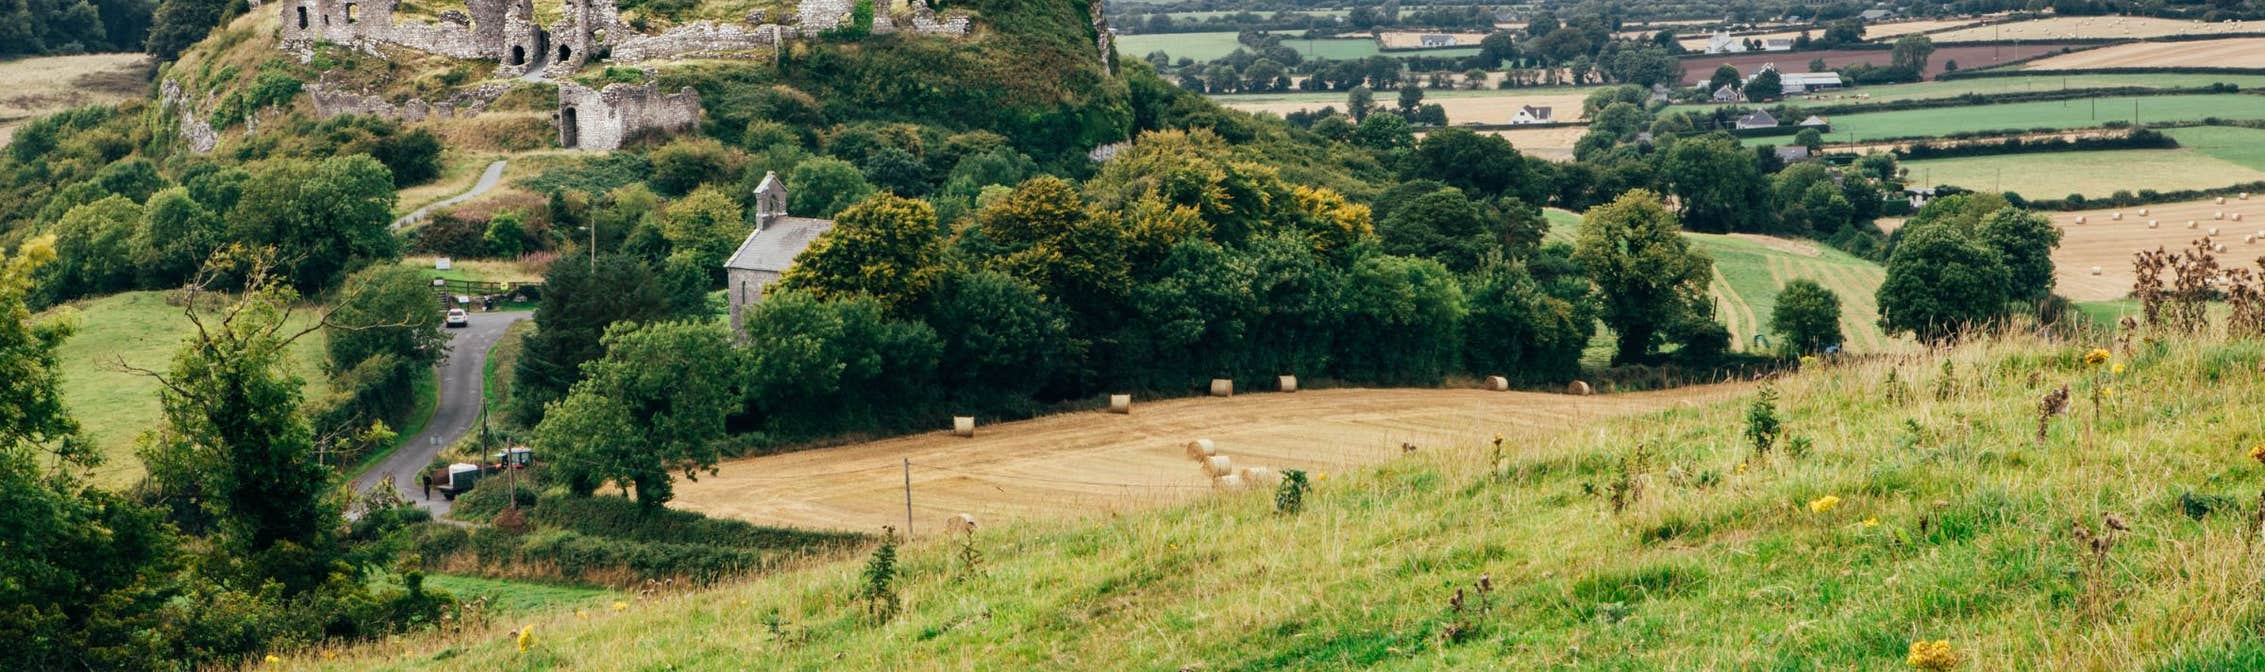 Rolling green hills in front of the Rock of Dunamase in County Laois